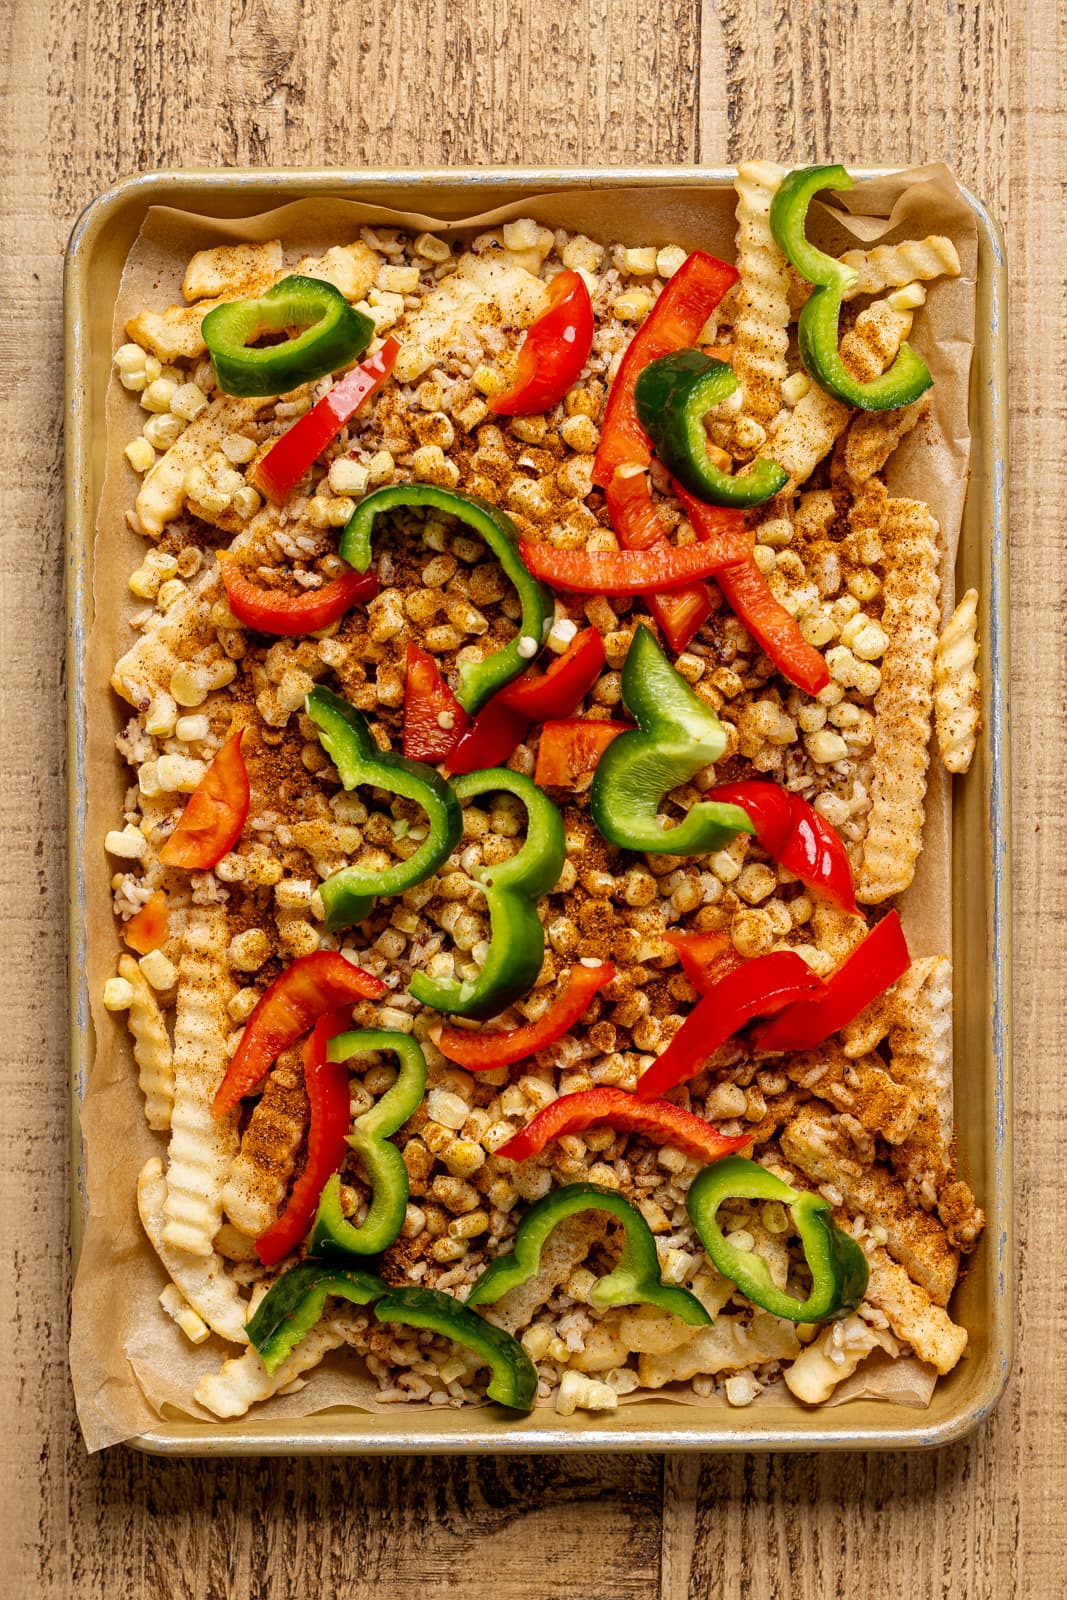 Fries on sheet pan with corn, quinoa, and peppers as topping.